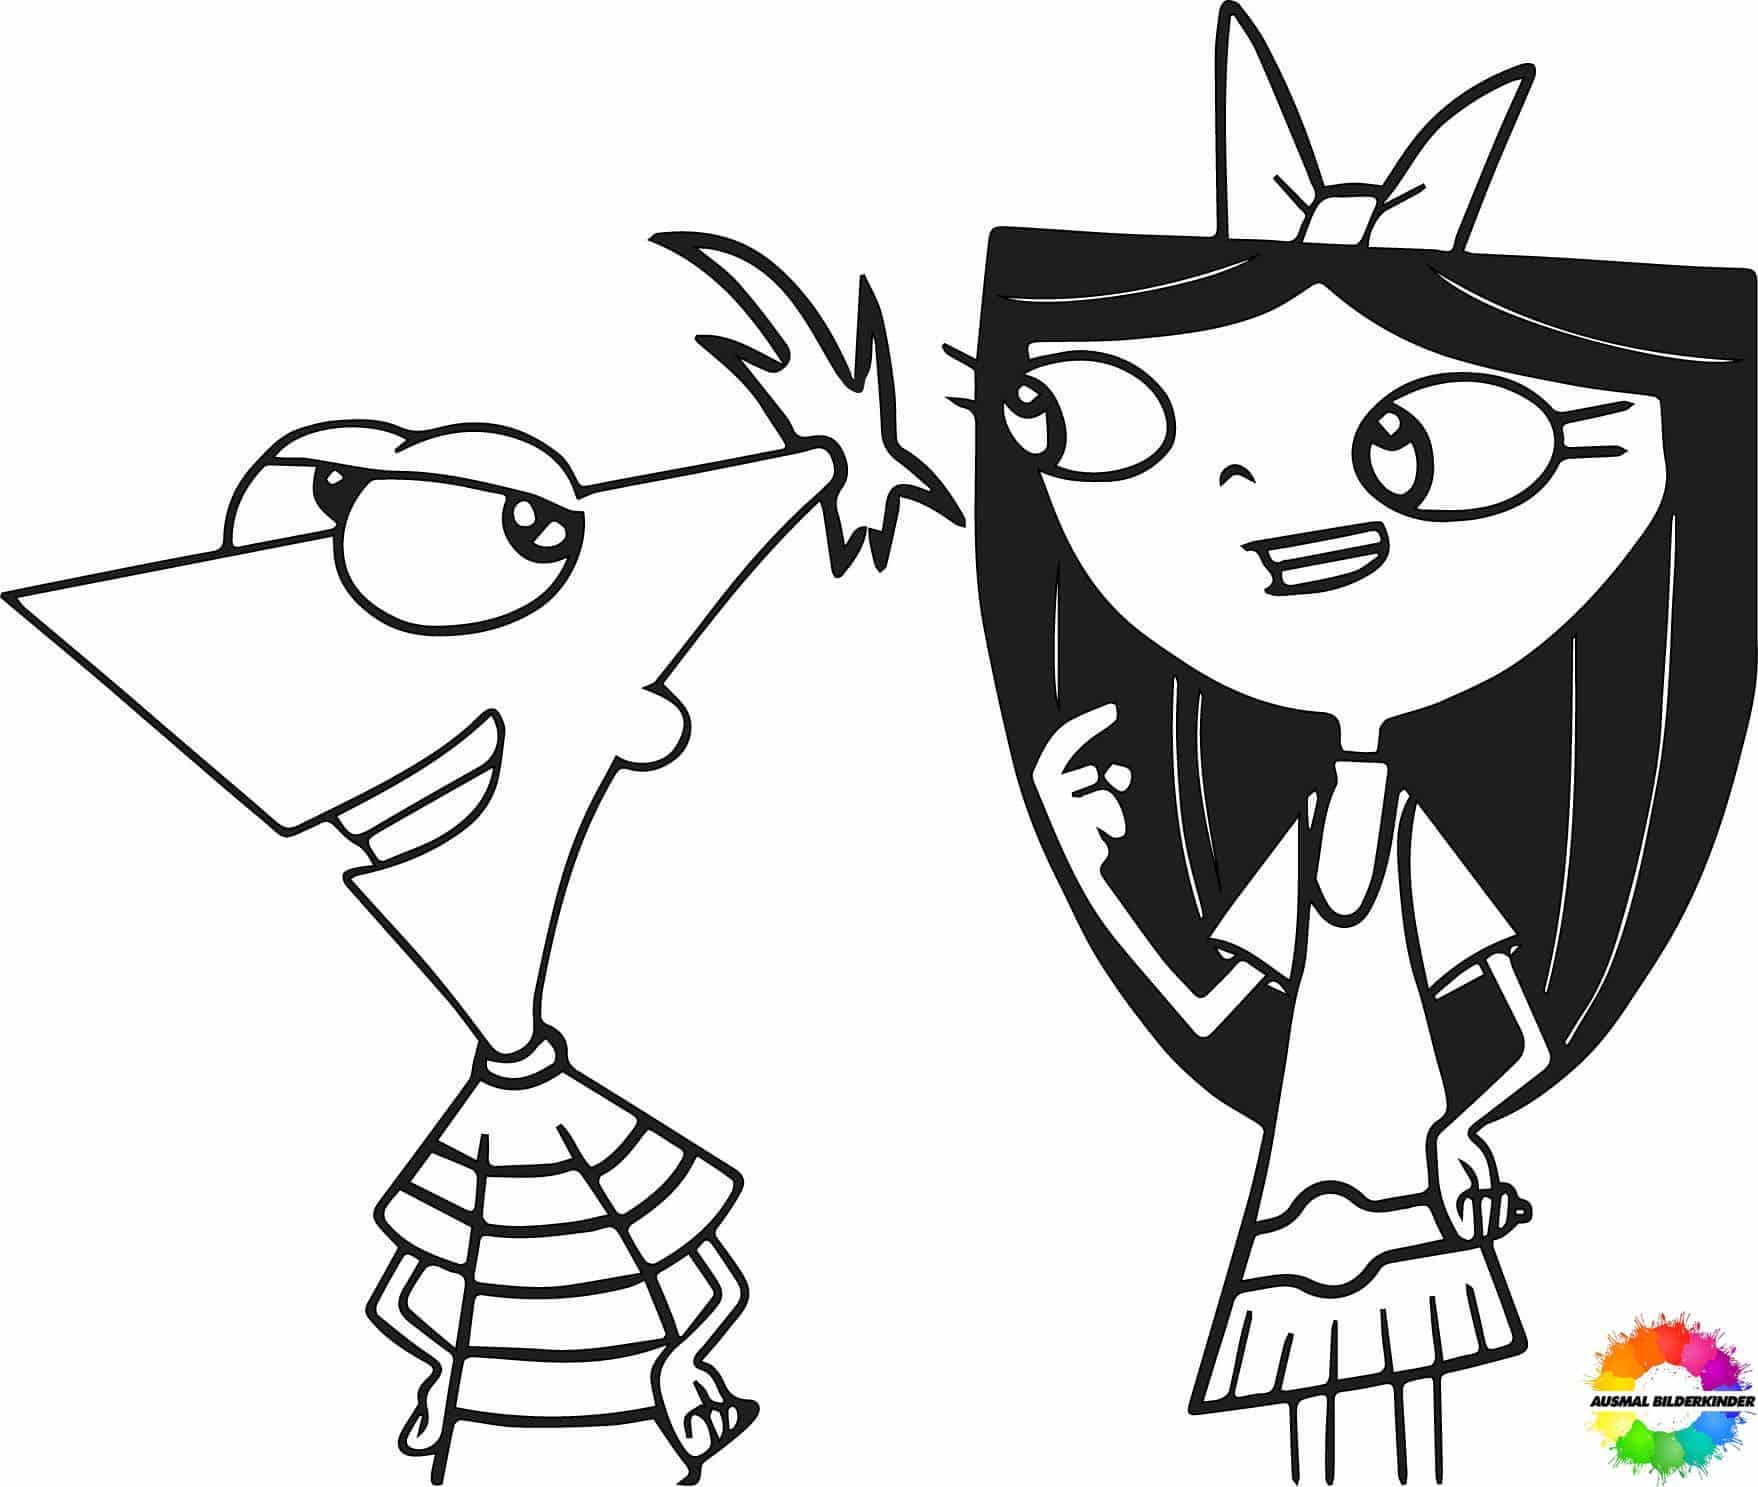 Phineas and Ferb 6